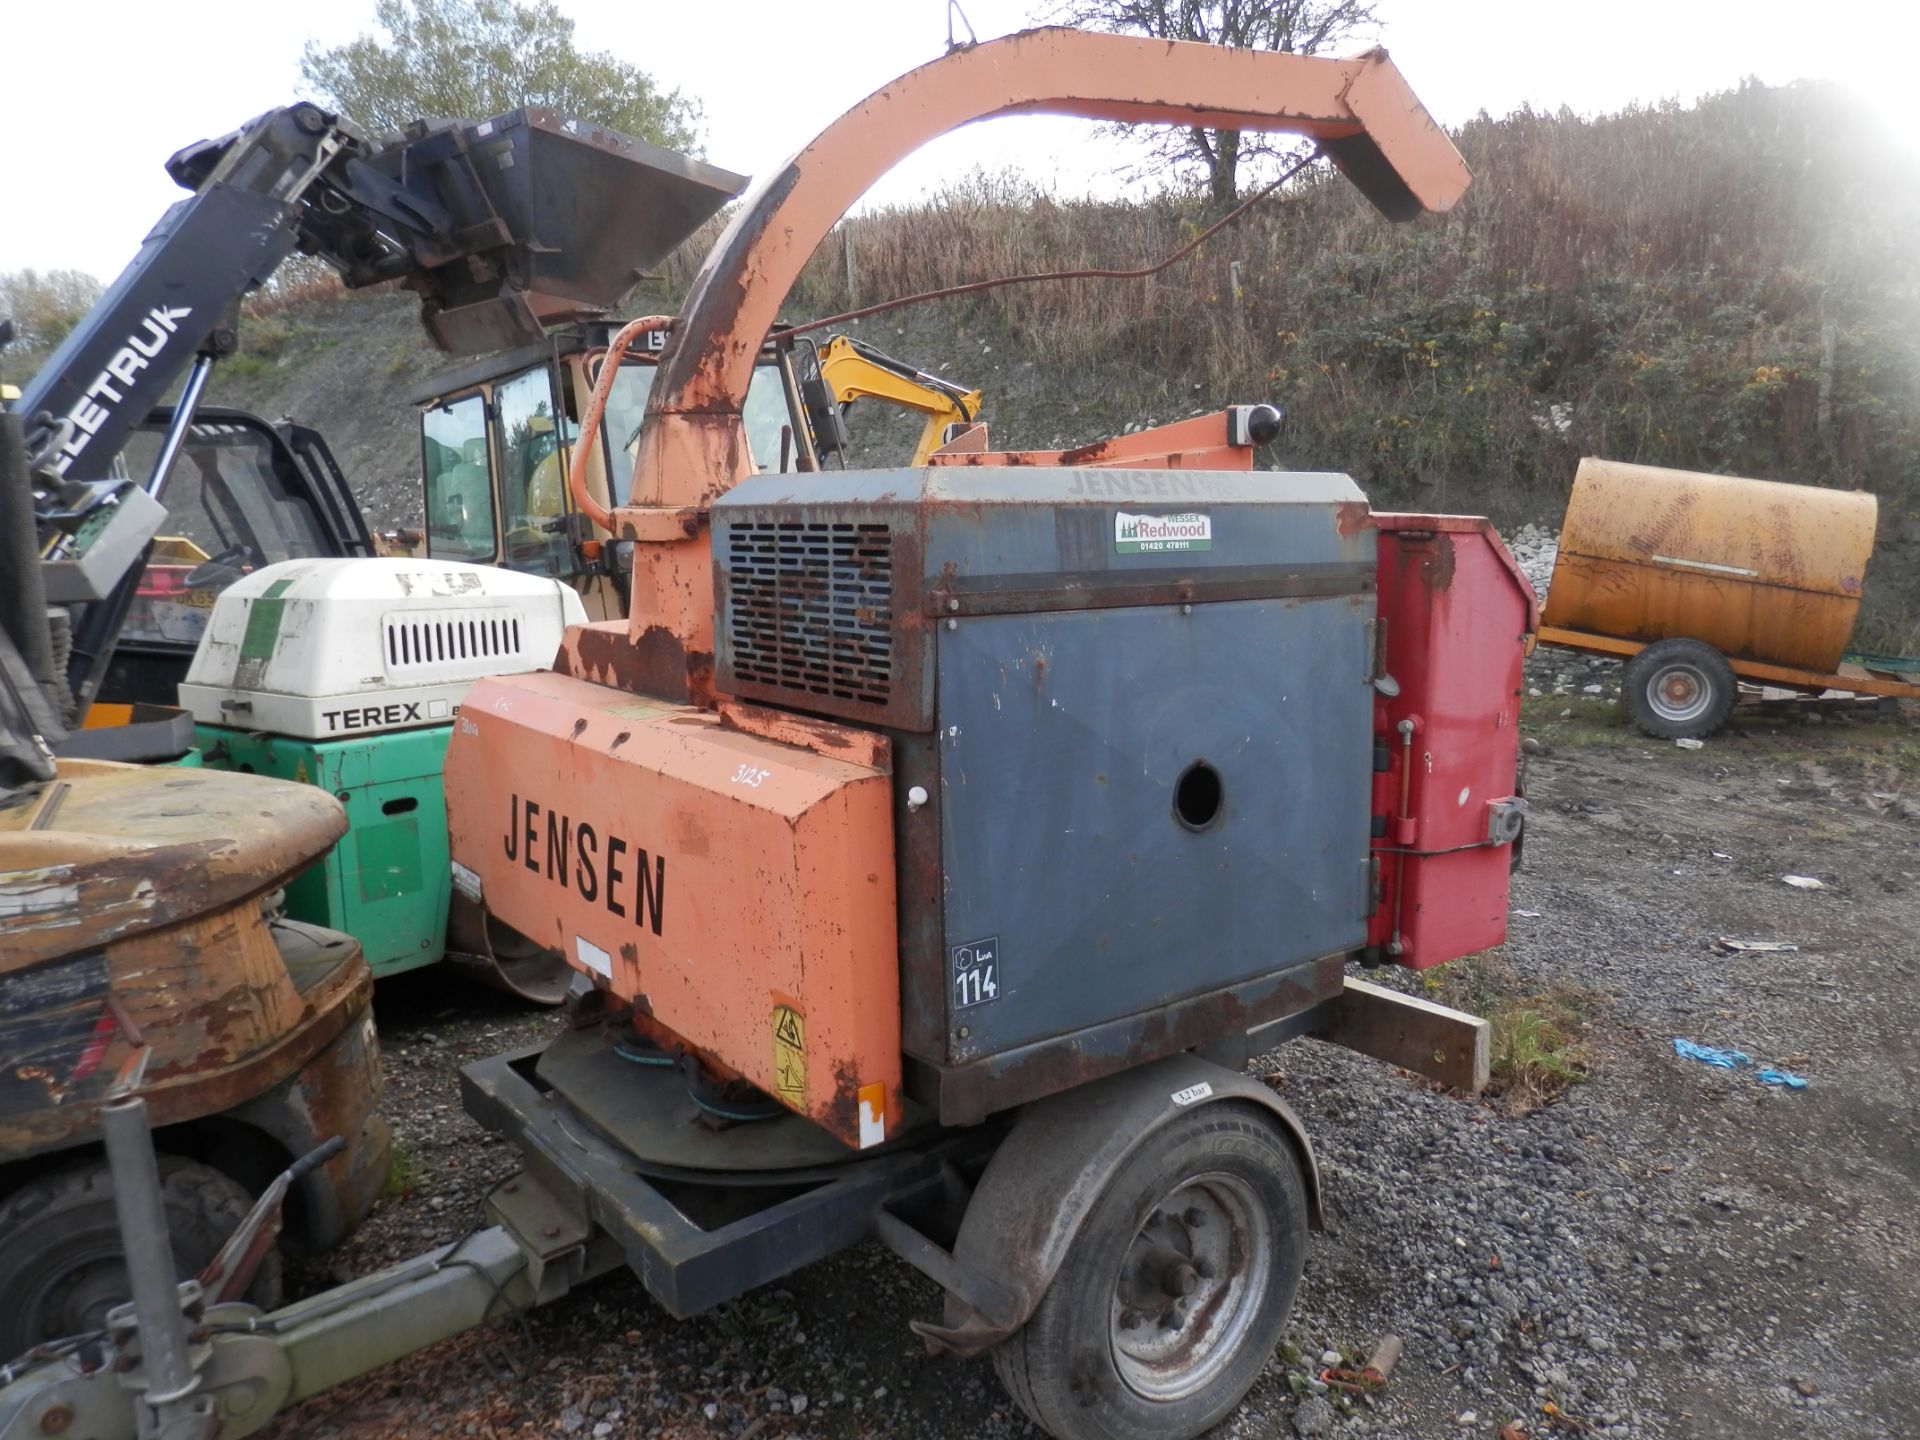 DS - QUALITY 2004 JENSEN DIESEL TURNTABLE CHIPPER, GOOD WORKING ORDER   GOOD WORKING QUALITY TRAILER - Image 5 of 7